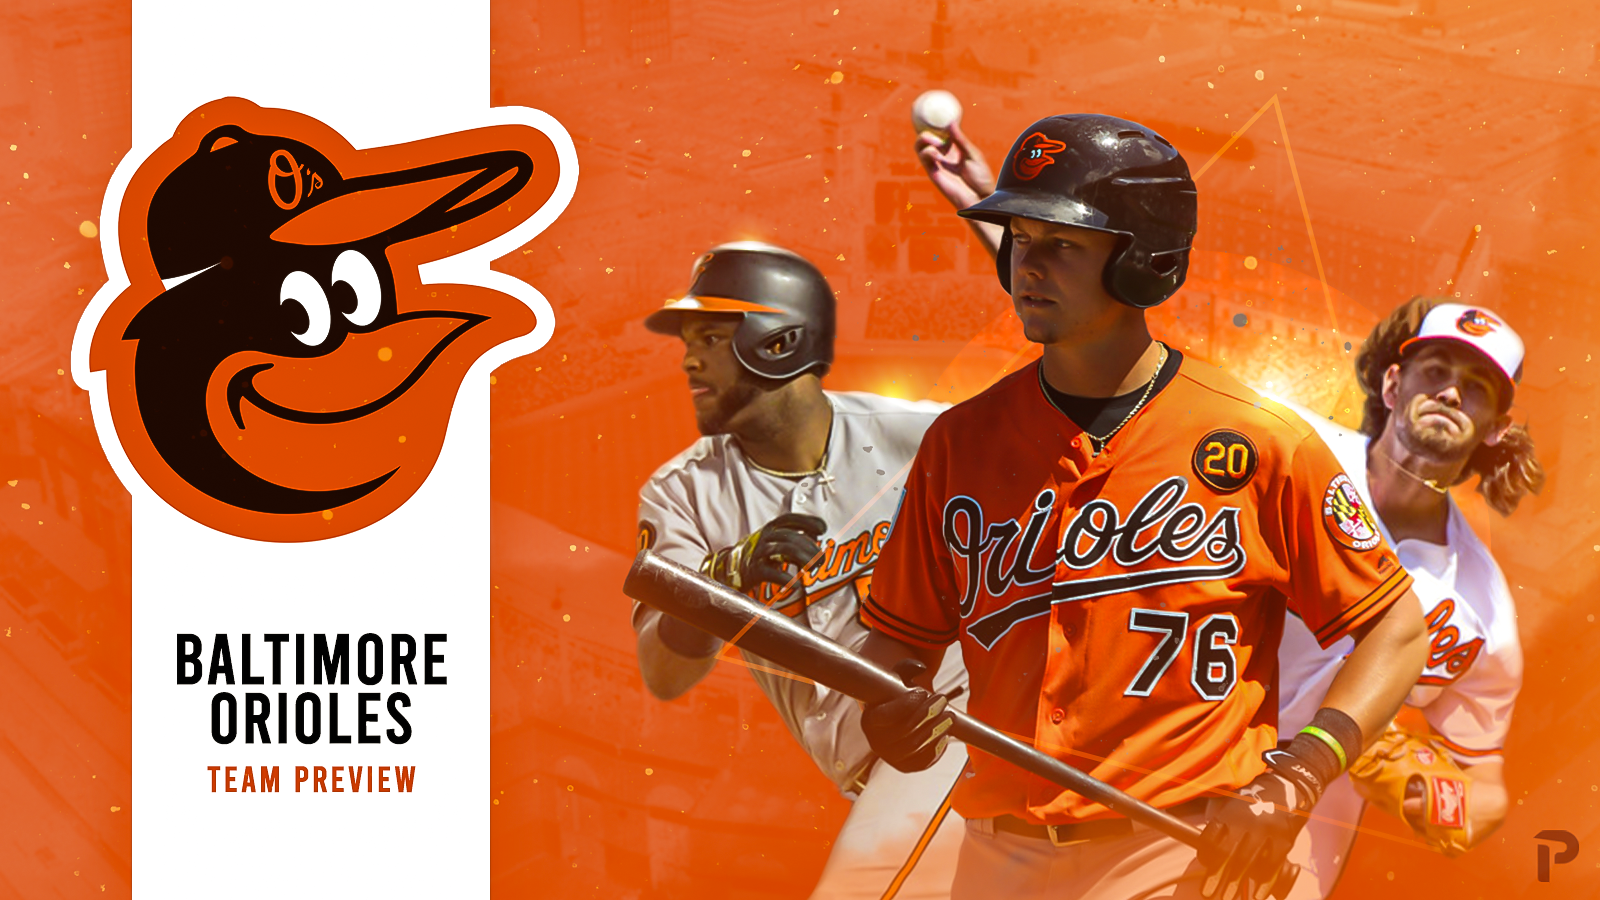 What are your hopes and predictions for the Orioles in the 2021